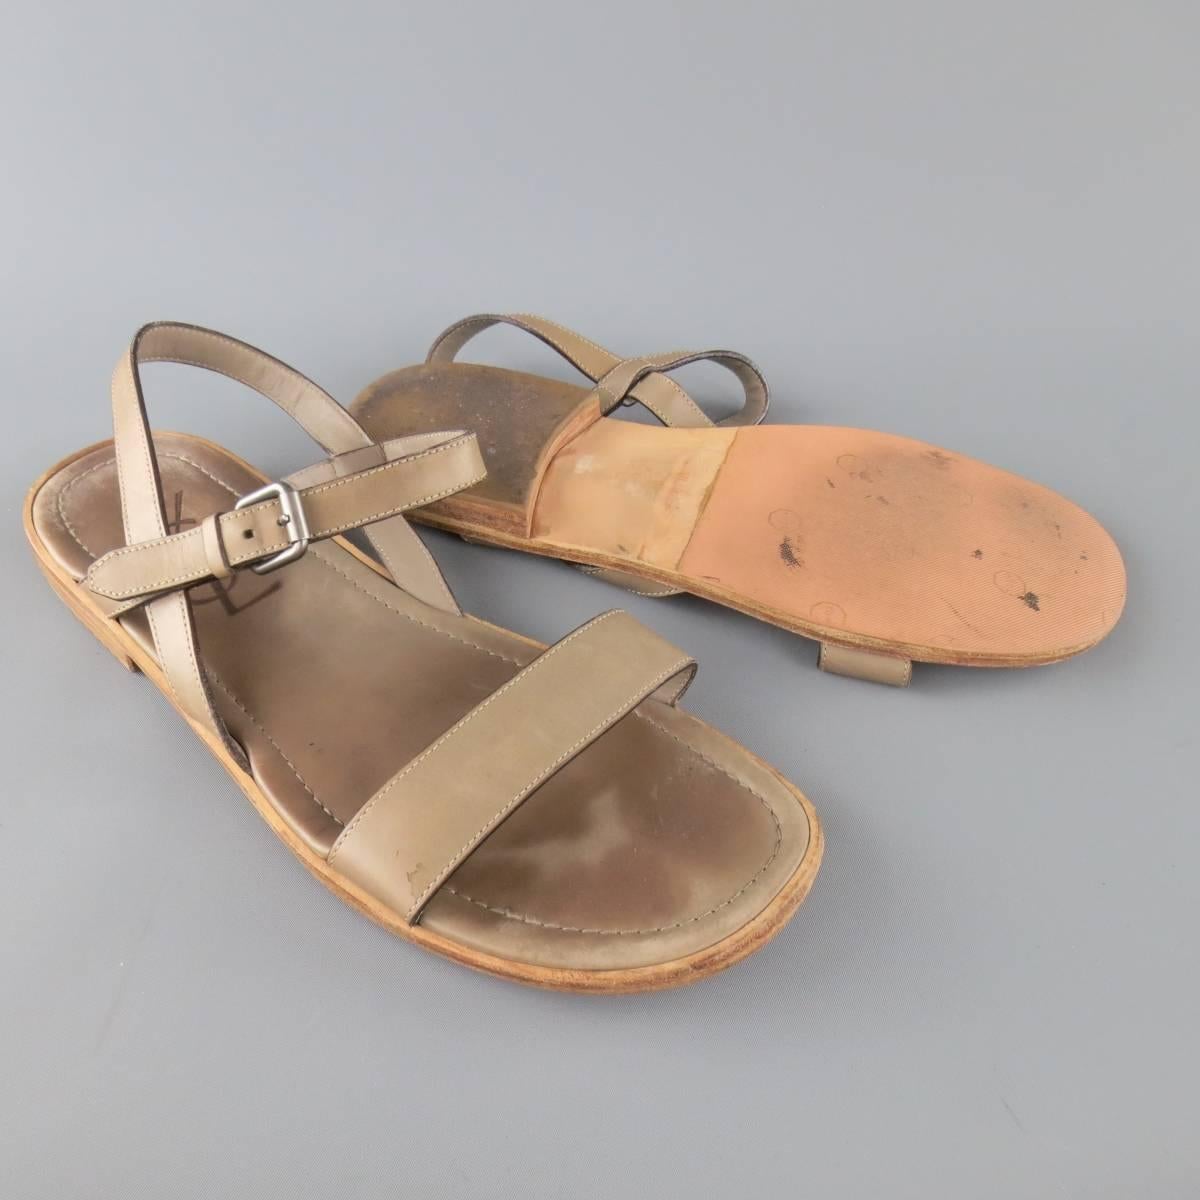 Brown Men's YVES SAINT LAURENT Size 11.5 Taupe Gray Leather Ankle Harness Sandals